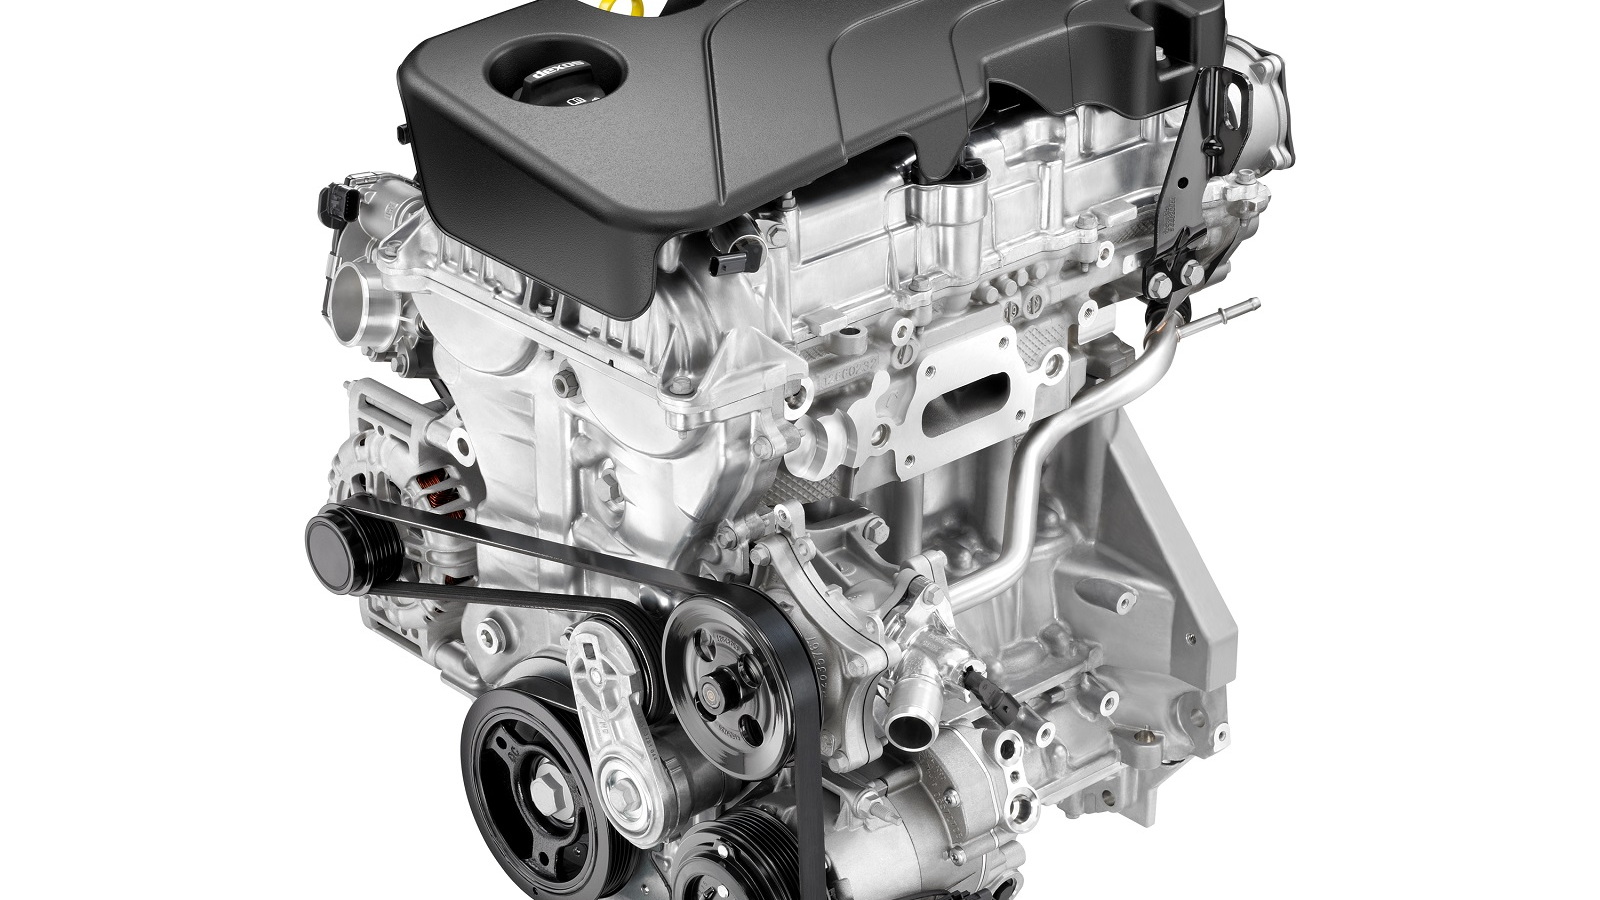 New GM 1.5-liter naturally aspirated Ecotec engine introduced for 2015 cars